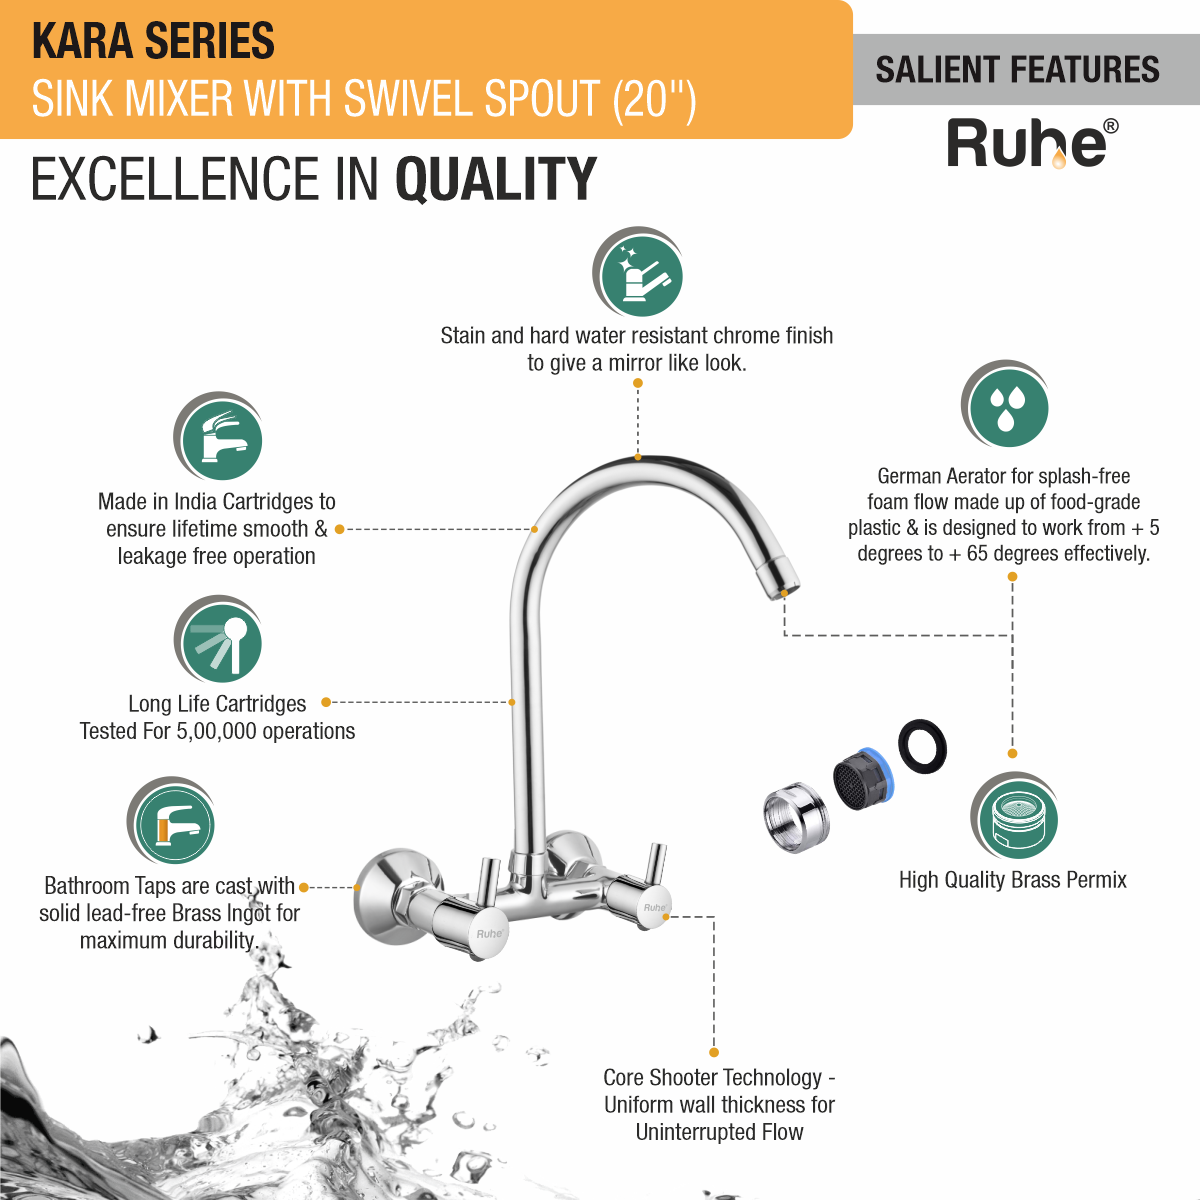 Kara Sink Mixer with Large (20 inches) Round Swivel Spout Faucet features